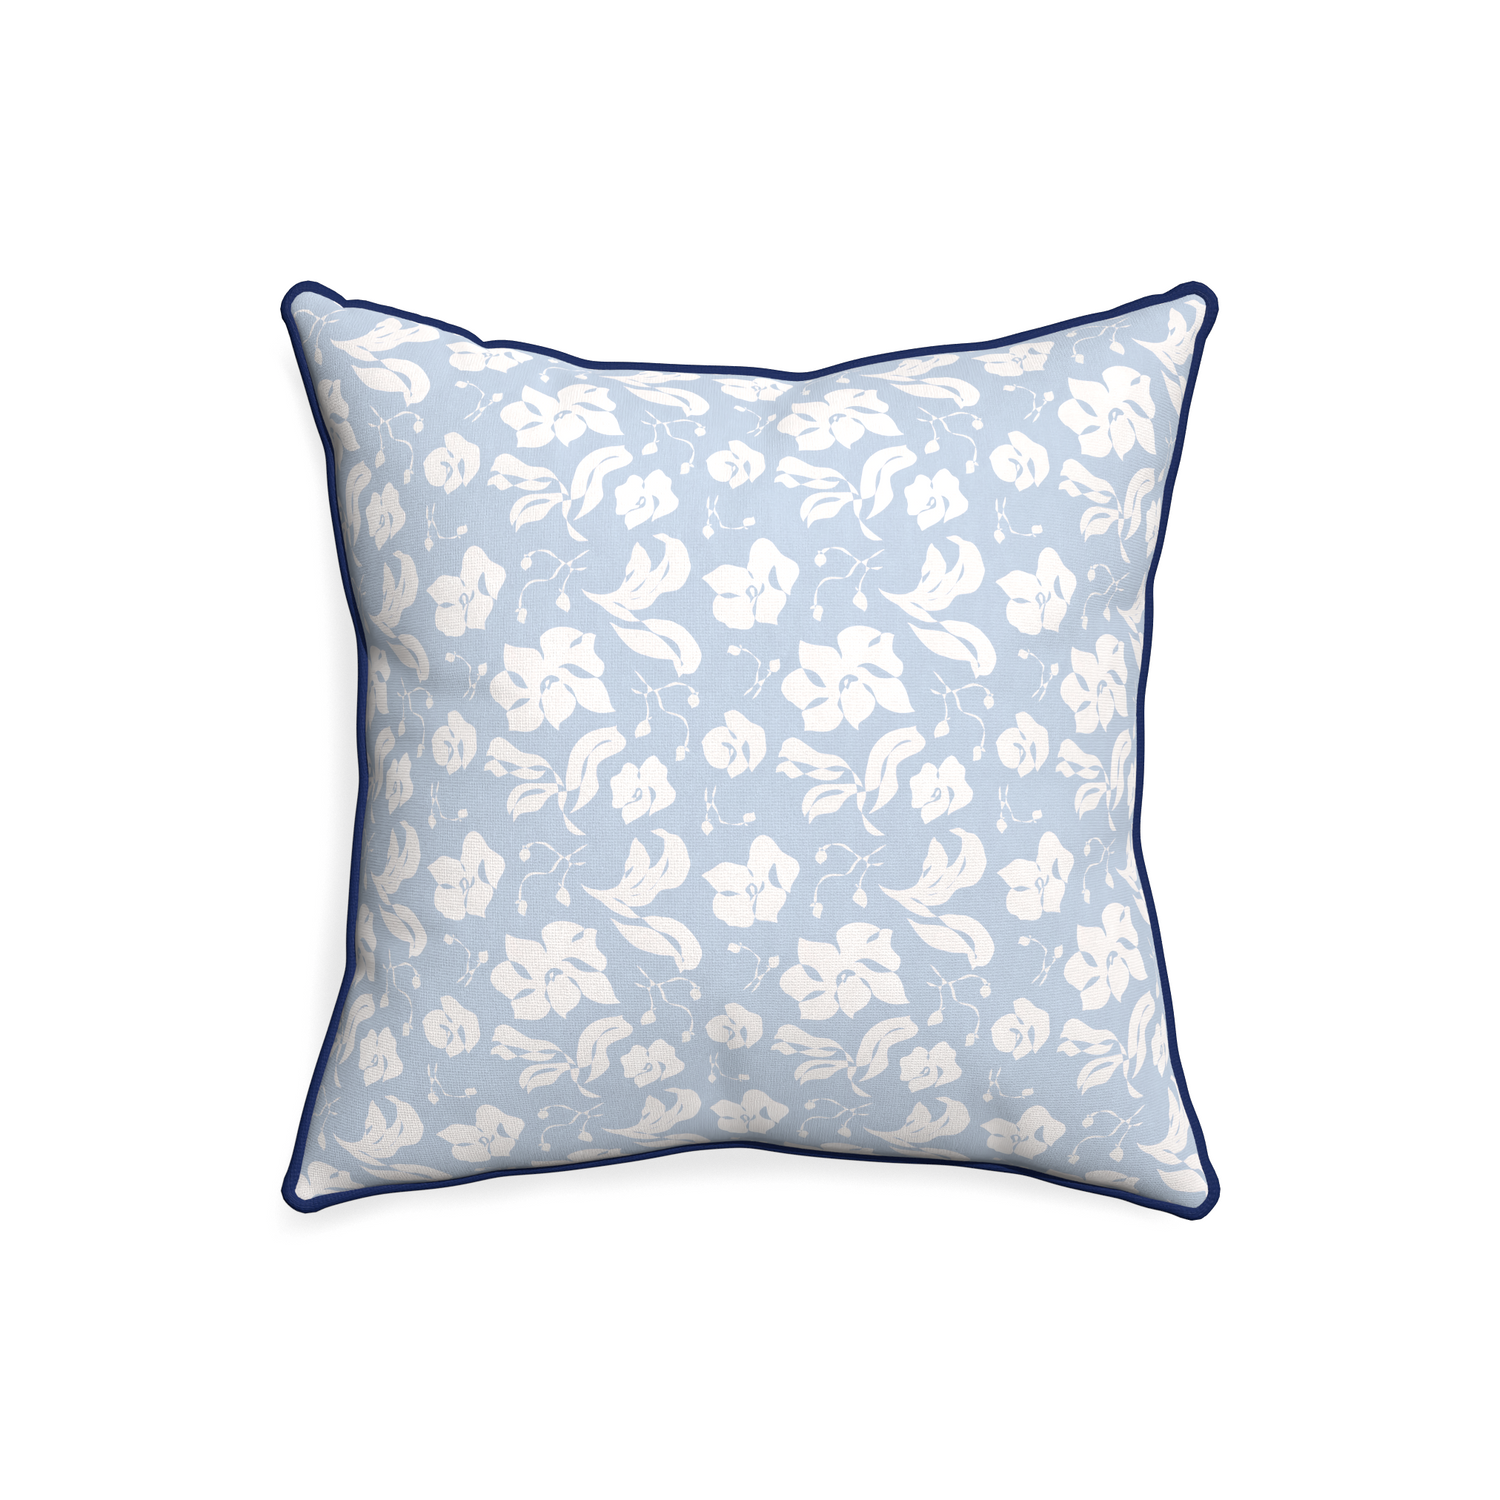 20-square georgia custom cornflower blue floralpillow with midnight piping on white background